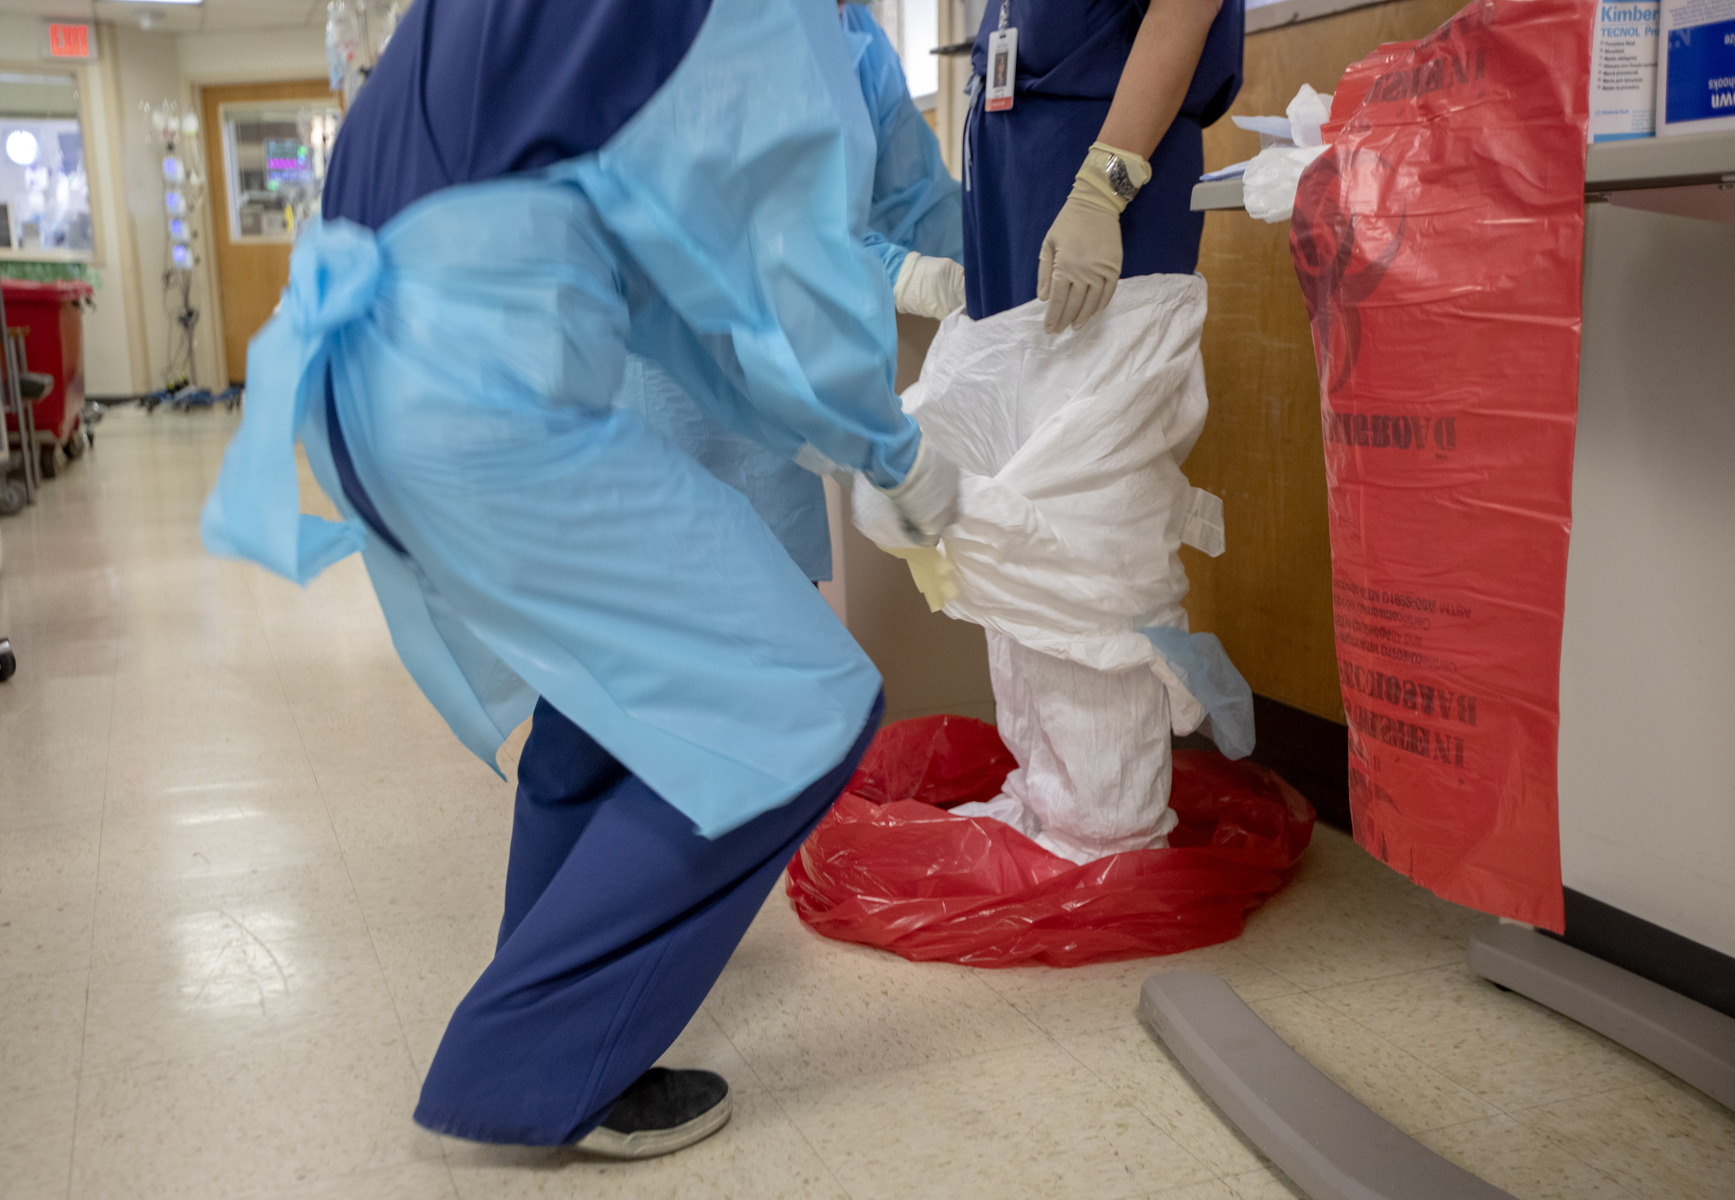 A Tyvek suit is removed carefully into a HAZMAT bag after exiting a COVID positive patient room in the ICU at Holy Name Medical Center.03/19/2020. Photo by Jeff Rhode/Holy Name Medical Center